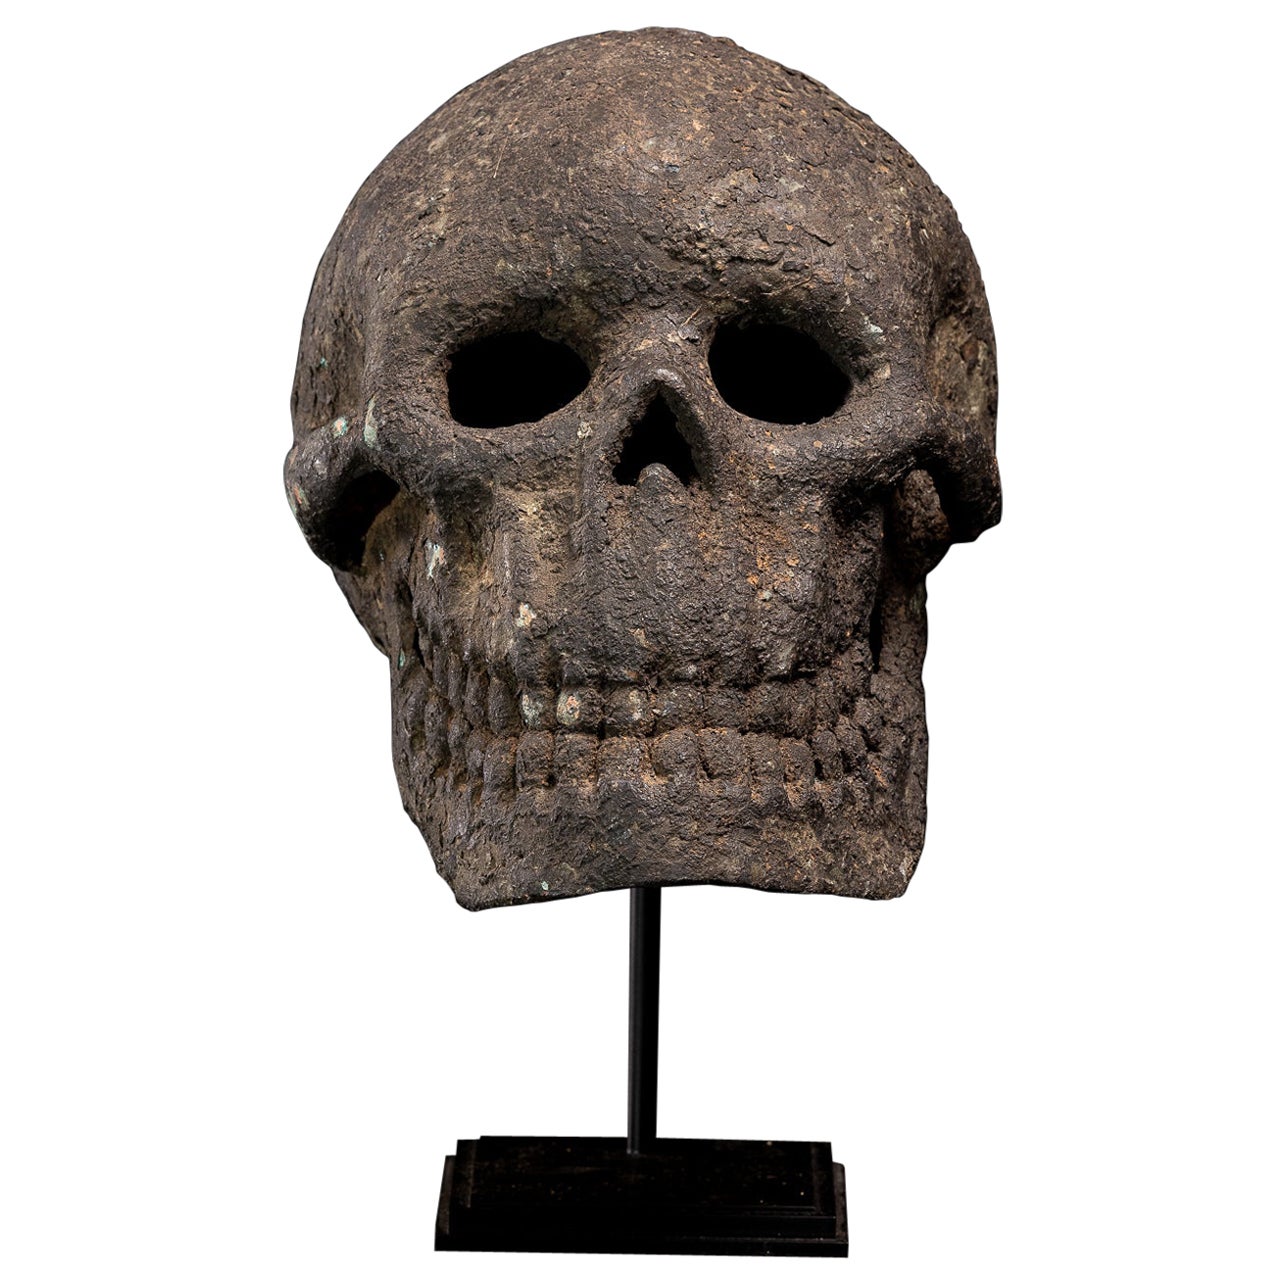 Lifesize 19 Th C Bronze Momento Mori Cast of a Human Skull.French Collection